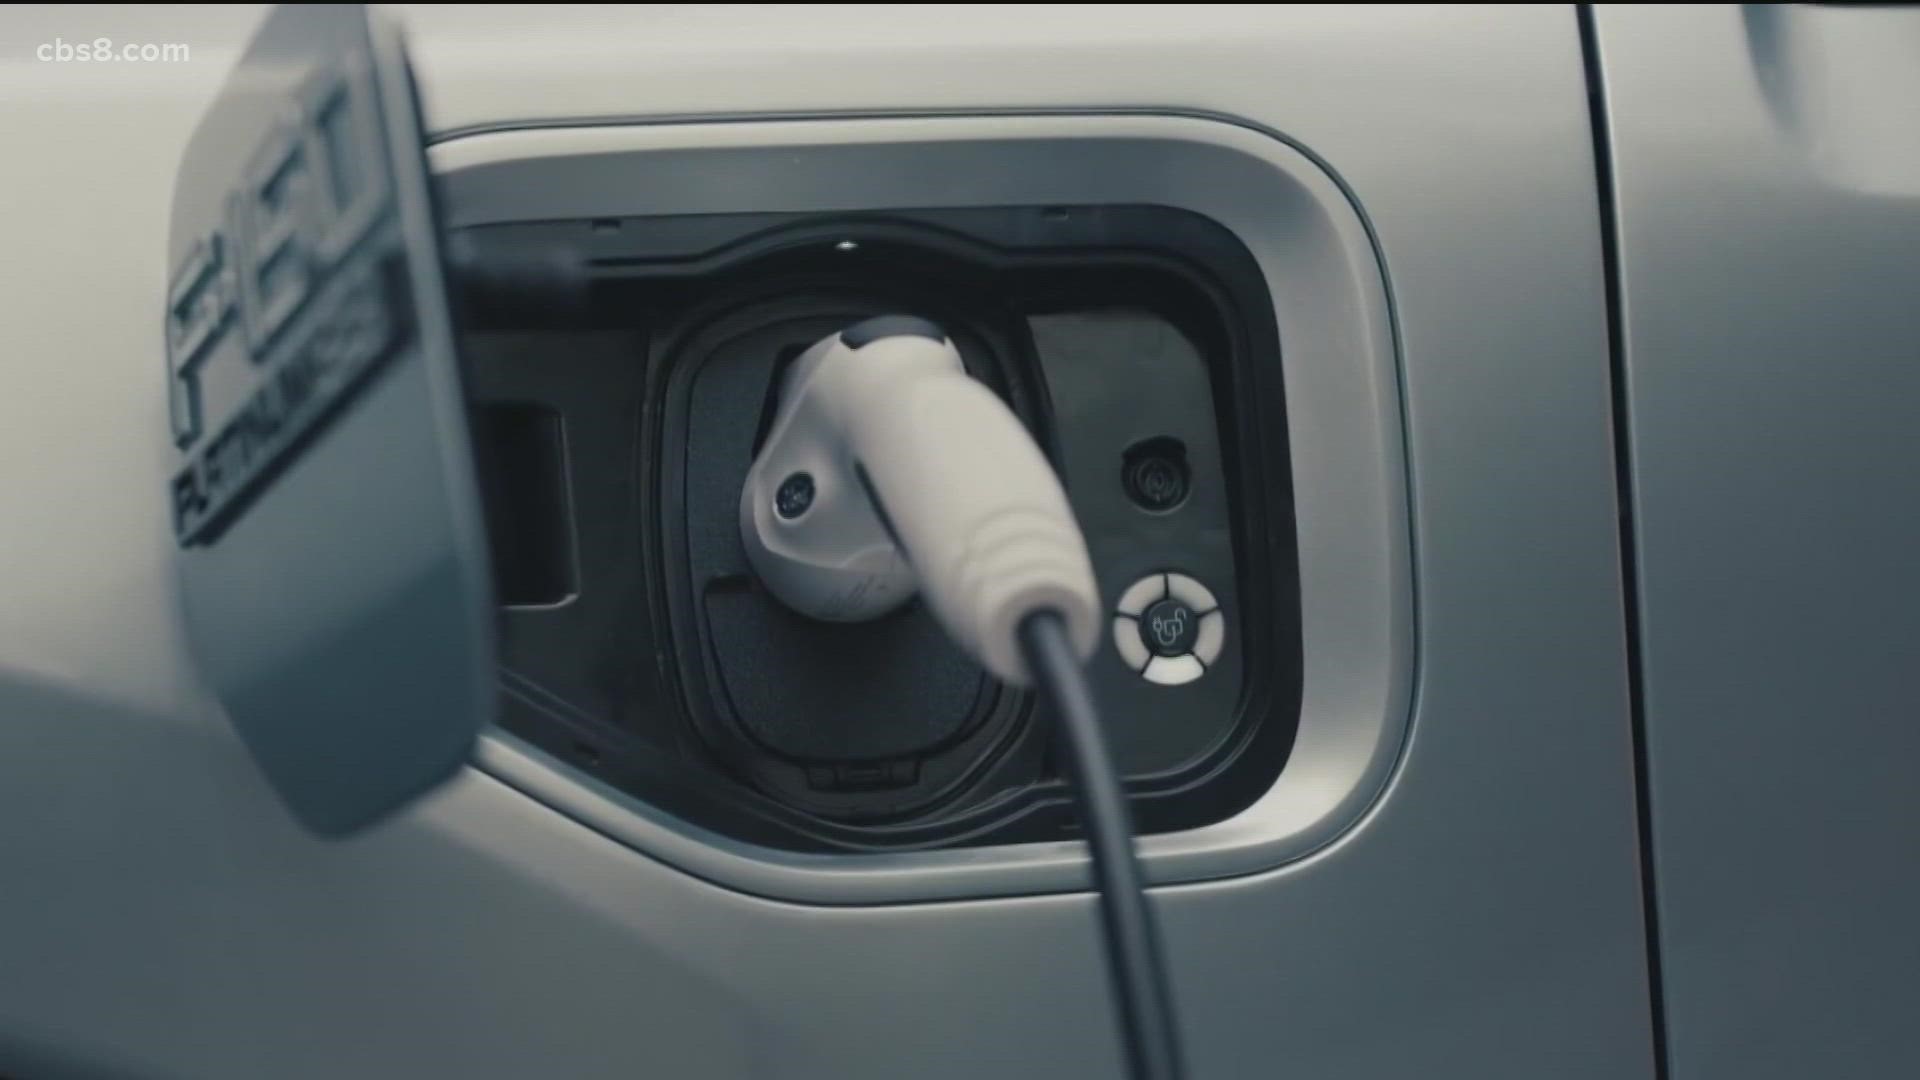 Experts say bidirectional charging will become standard equipment on most EVs.